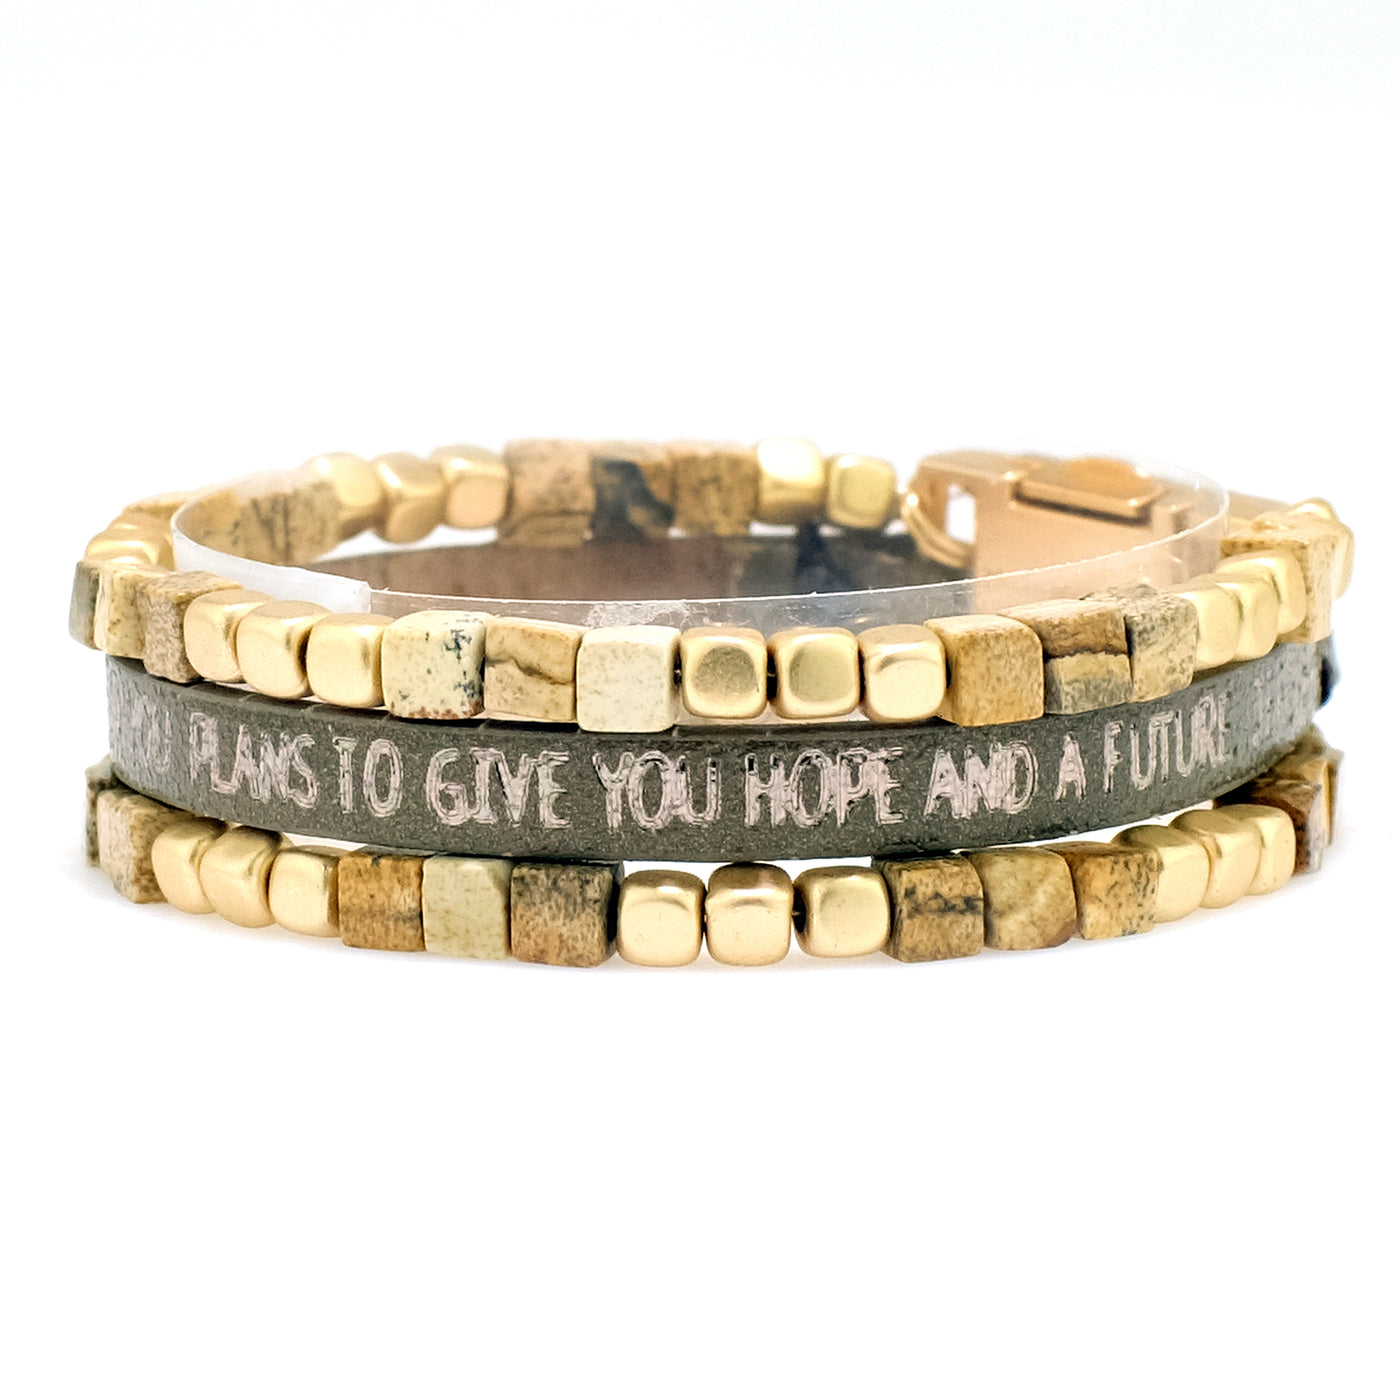 Fossil Bracelet-Good Work(s) Make A Difference® | Christian and Inspirational Jewelry Company in Vernon, California